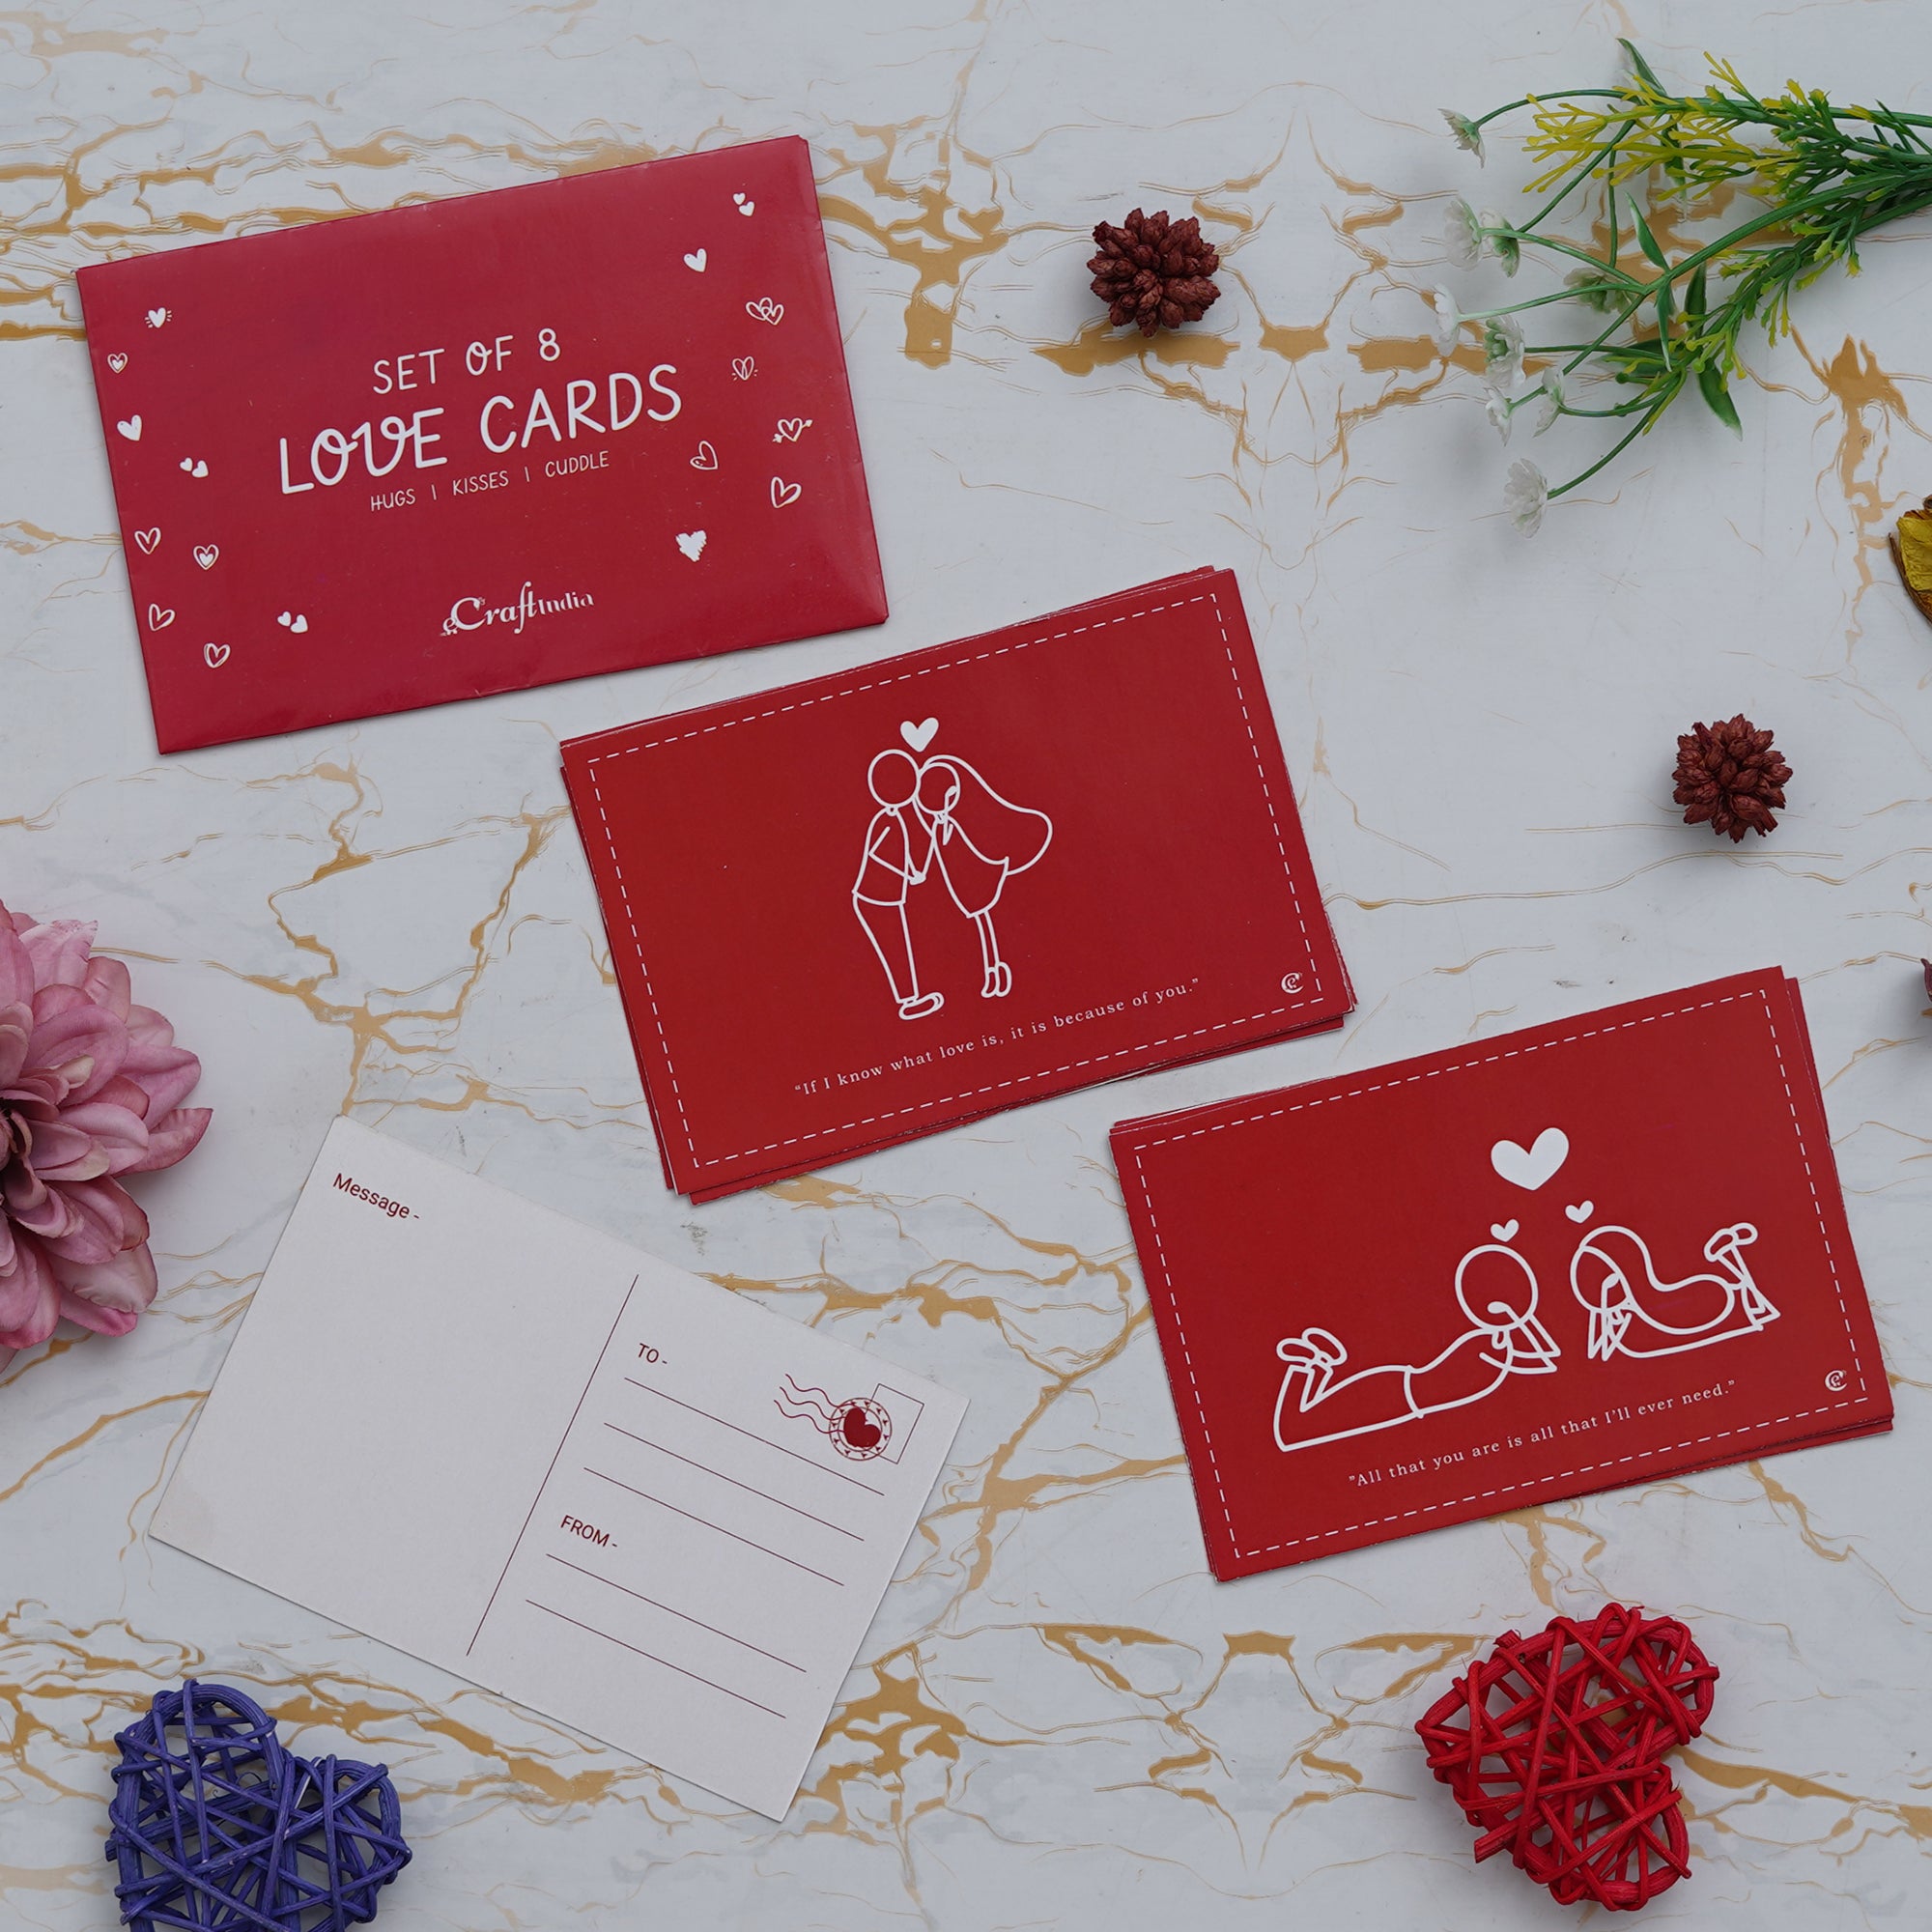 Valentine Combo of Pack of 8 Love Gift Cards, Red Gift Box with Teddy & Roses, Red Message Bottle Wooden Box Set 1